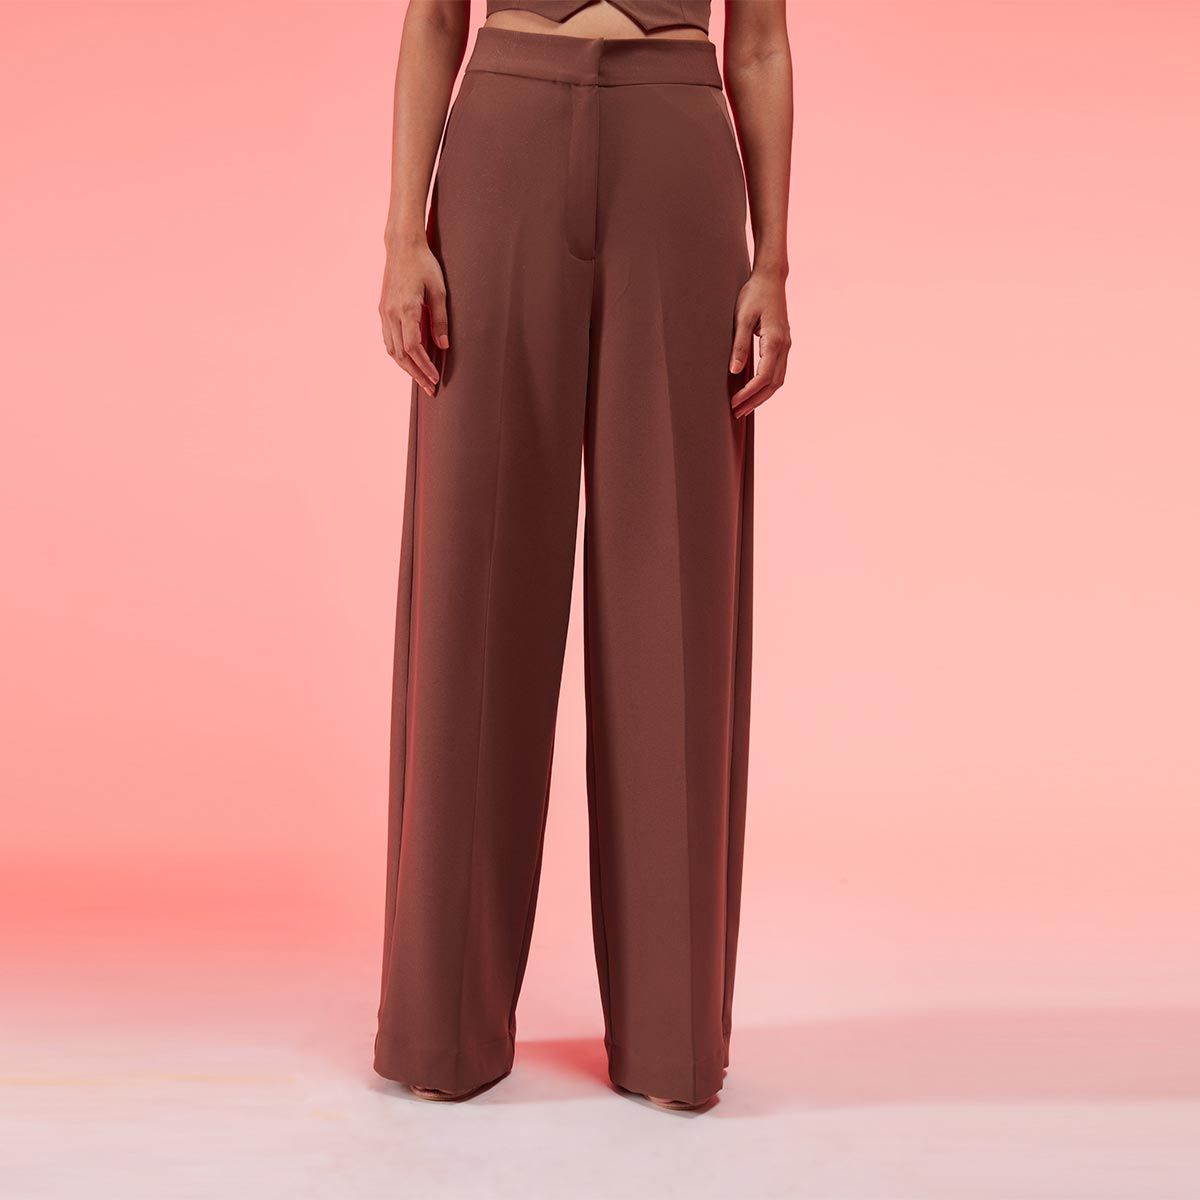 Buy Trousers For Women  Ladies Trousers Online  Not So Pink